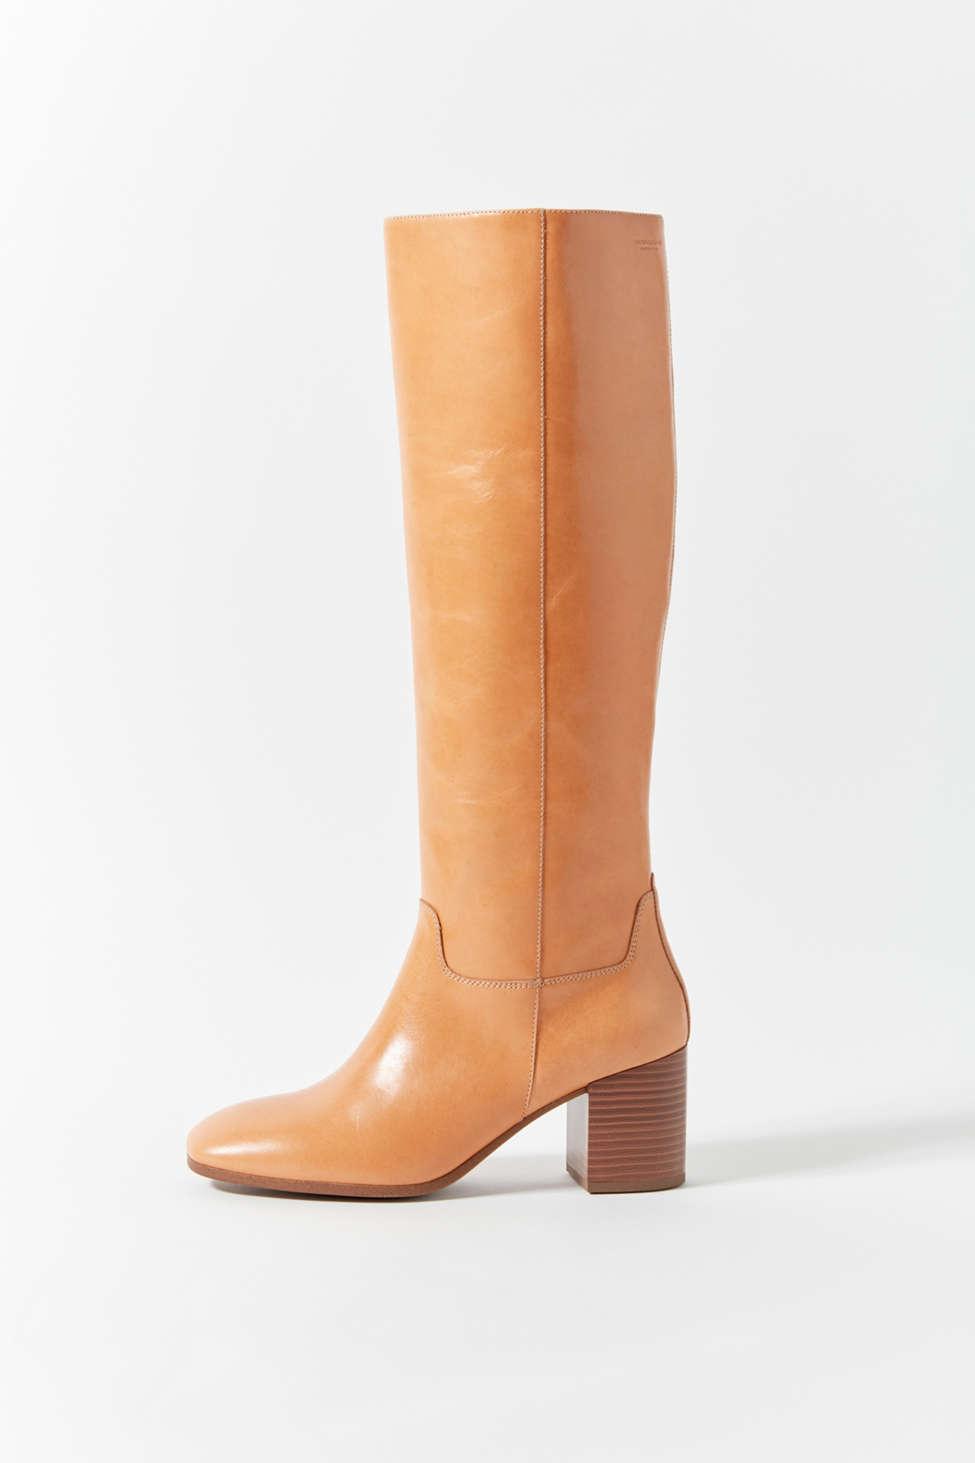 Vagabond Shoemakers Nicole Knee-high Boot in Brown | Lyst